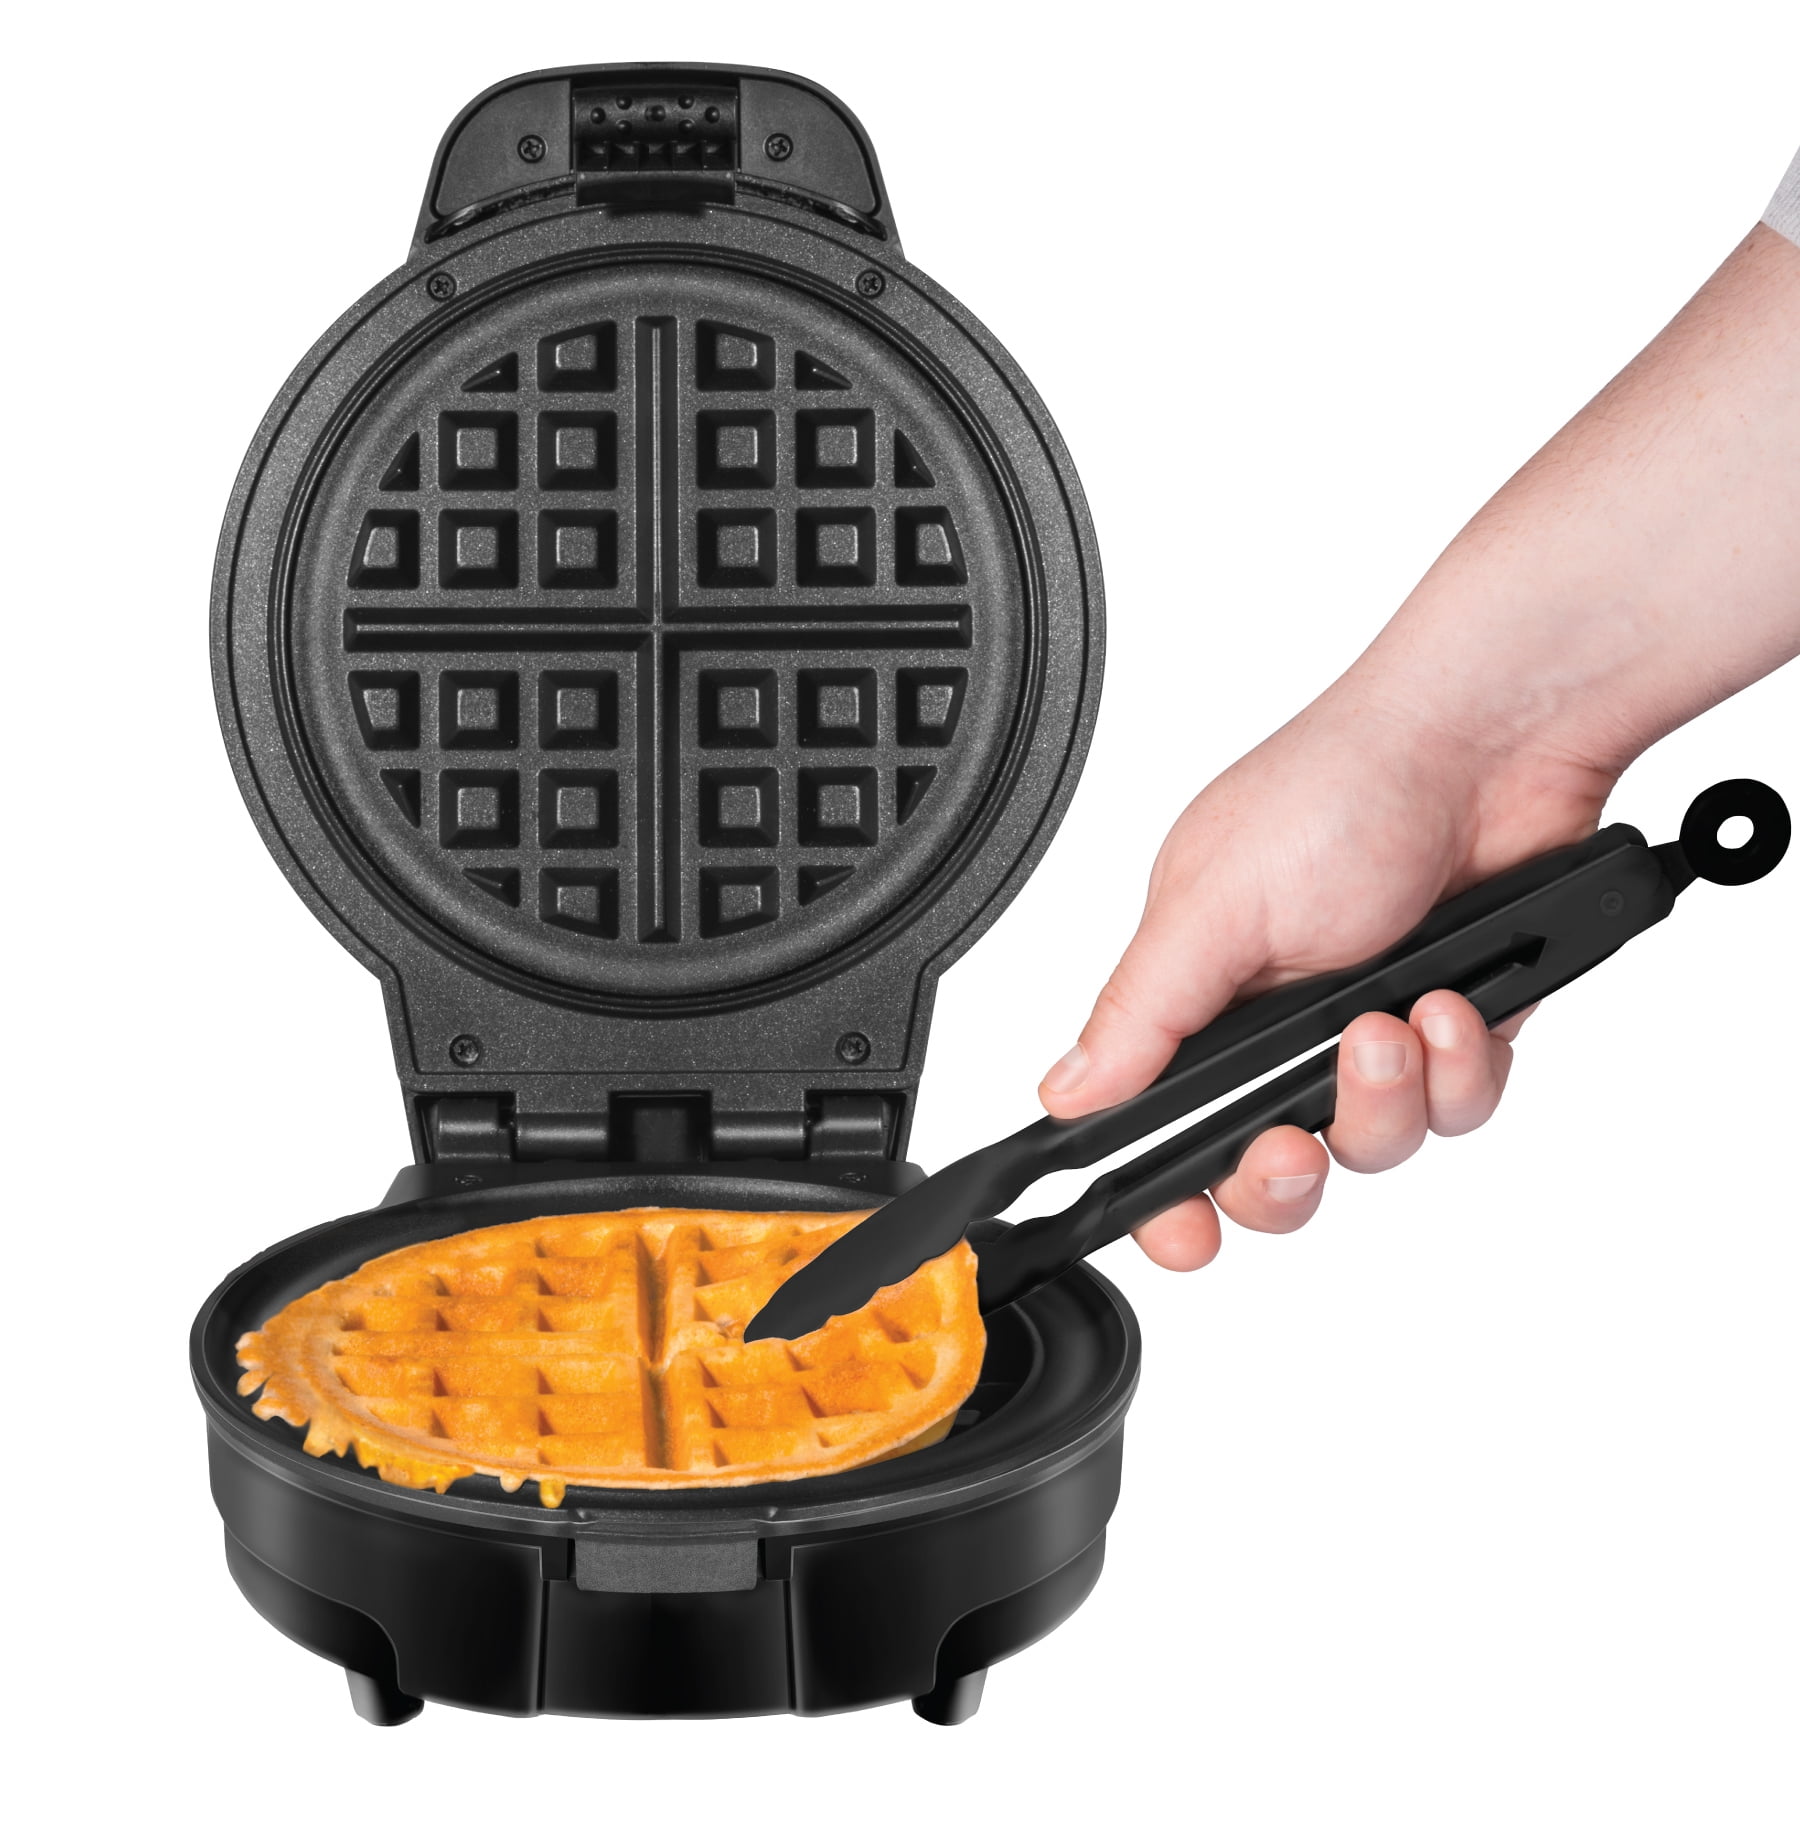 Chefman 2 Slice Waffle Maker Cool-To-Touch Handles and Non-Stick Cooking Surface Black 